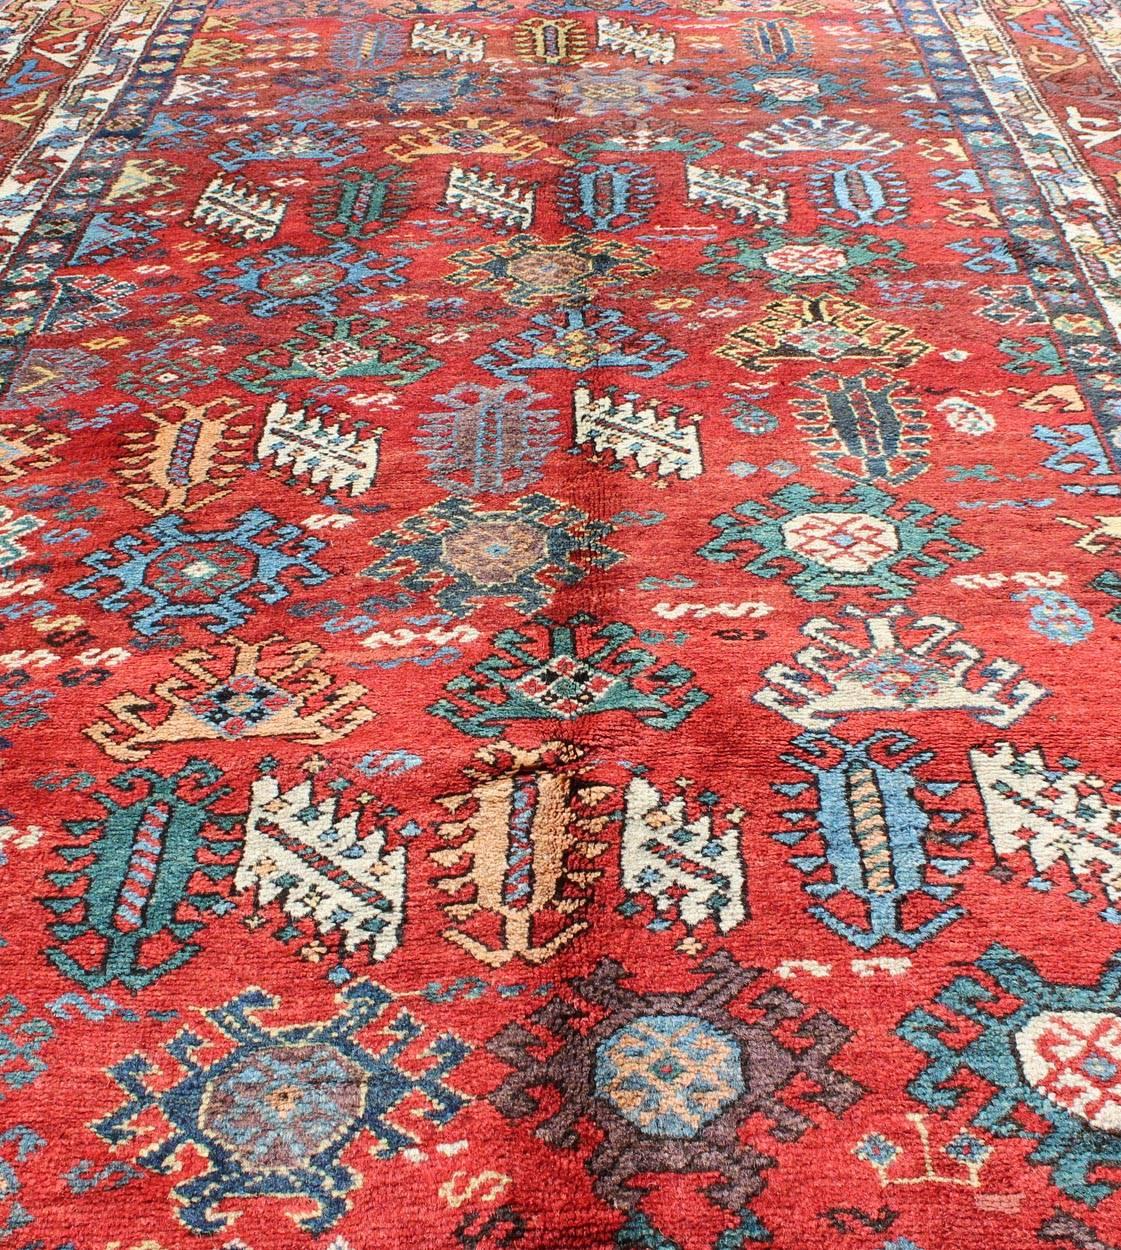 Antique Qashqai Persian Rug with All-Over Sub-Geometric Design and Tiered Border In Excellent Condition For Sale In Atlanta, GA